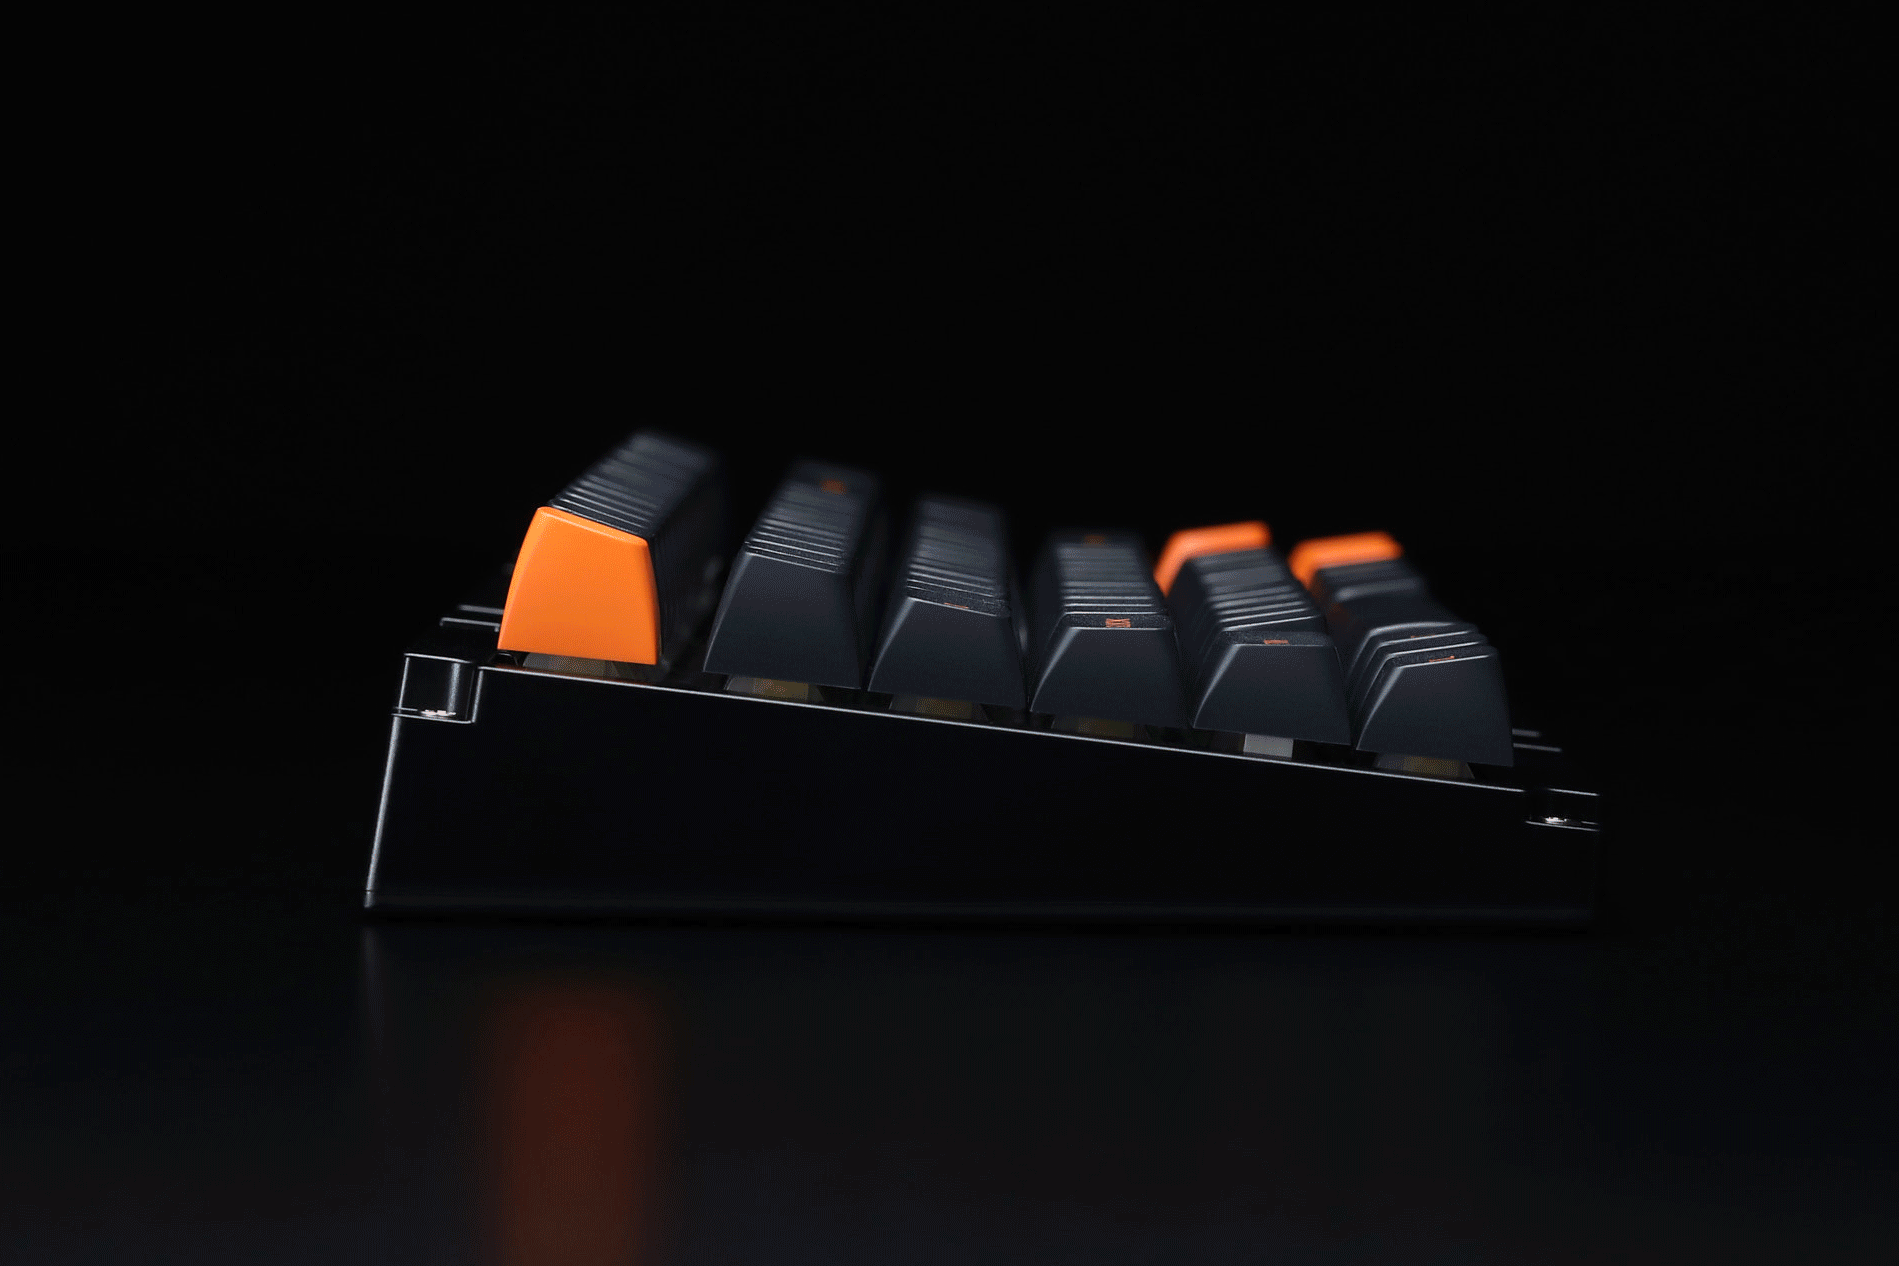 A gif of an orange top case being installed on the keyboard.